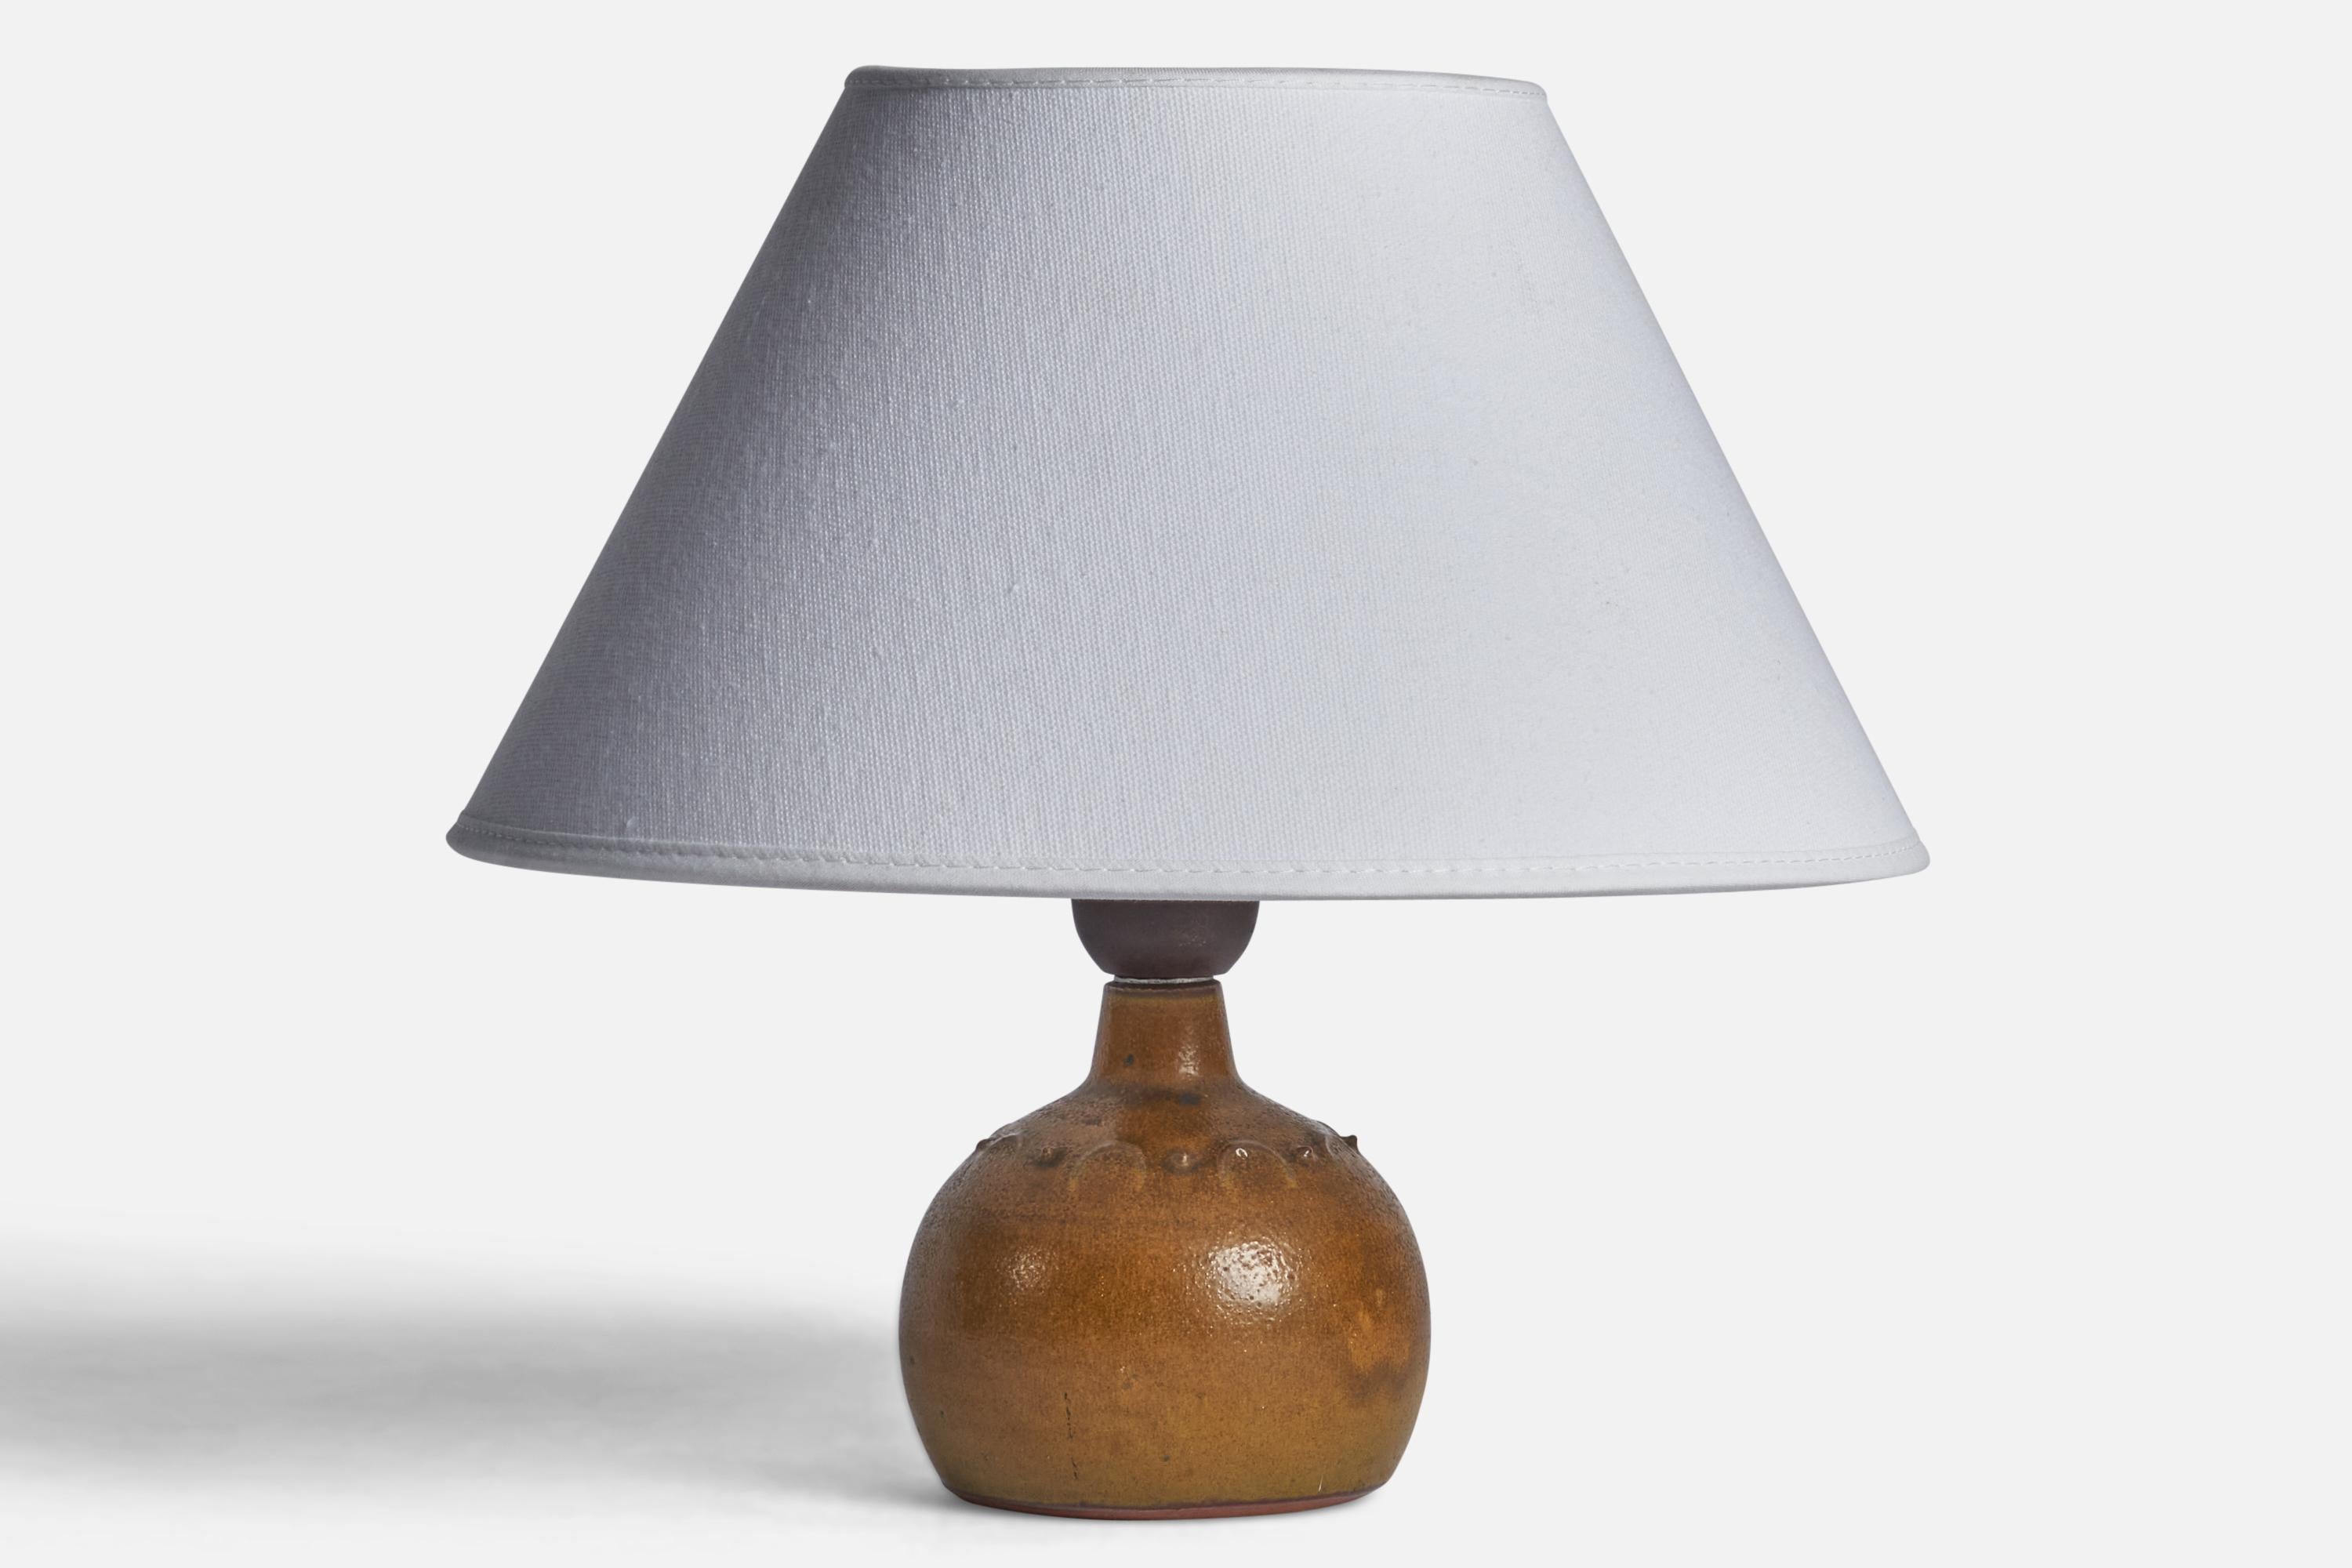 A small brown-glazed stoneware table lamp designed and produced by Rolf Palm, Mölle, Sweden, 1960s.

Dimensions of Lamp (inches): 6.65” H x 3.5” Diameter
Dimensions of Shade (inches): 7” Top Diameter x 10” Bottom Diameter x 5.5” H 
Dimensions of